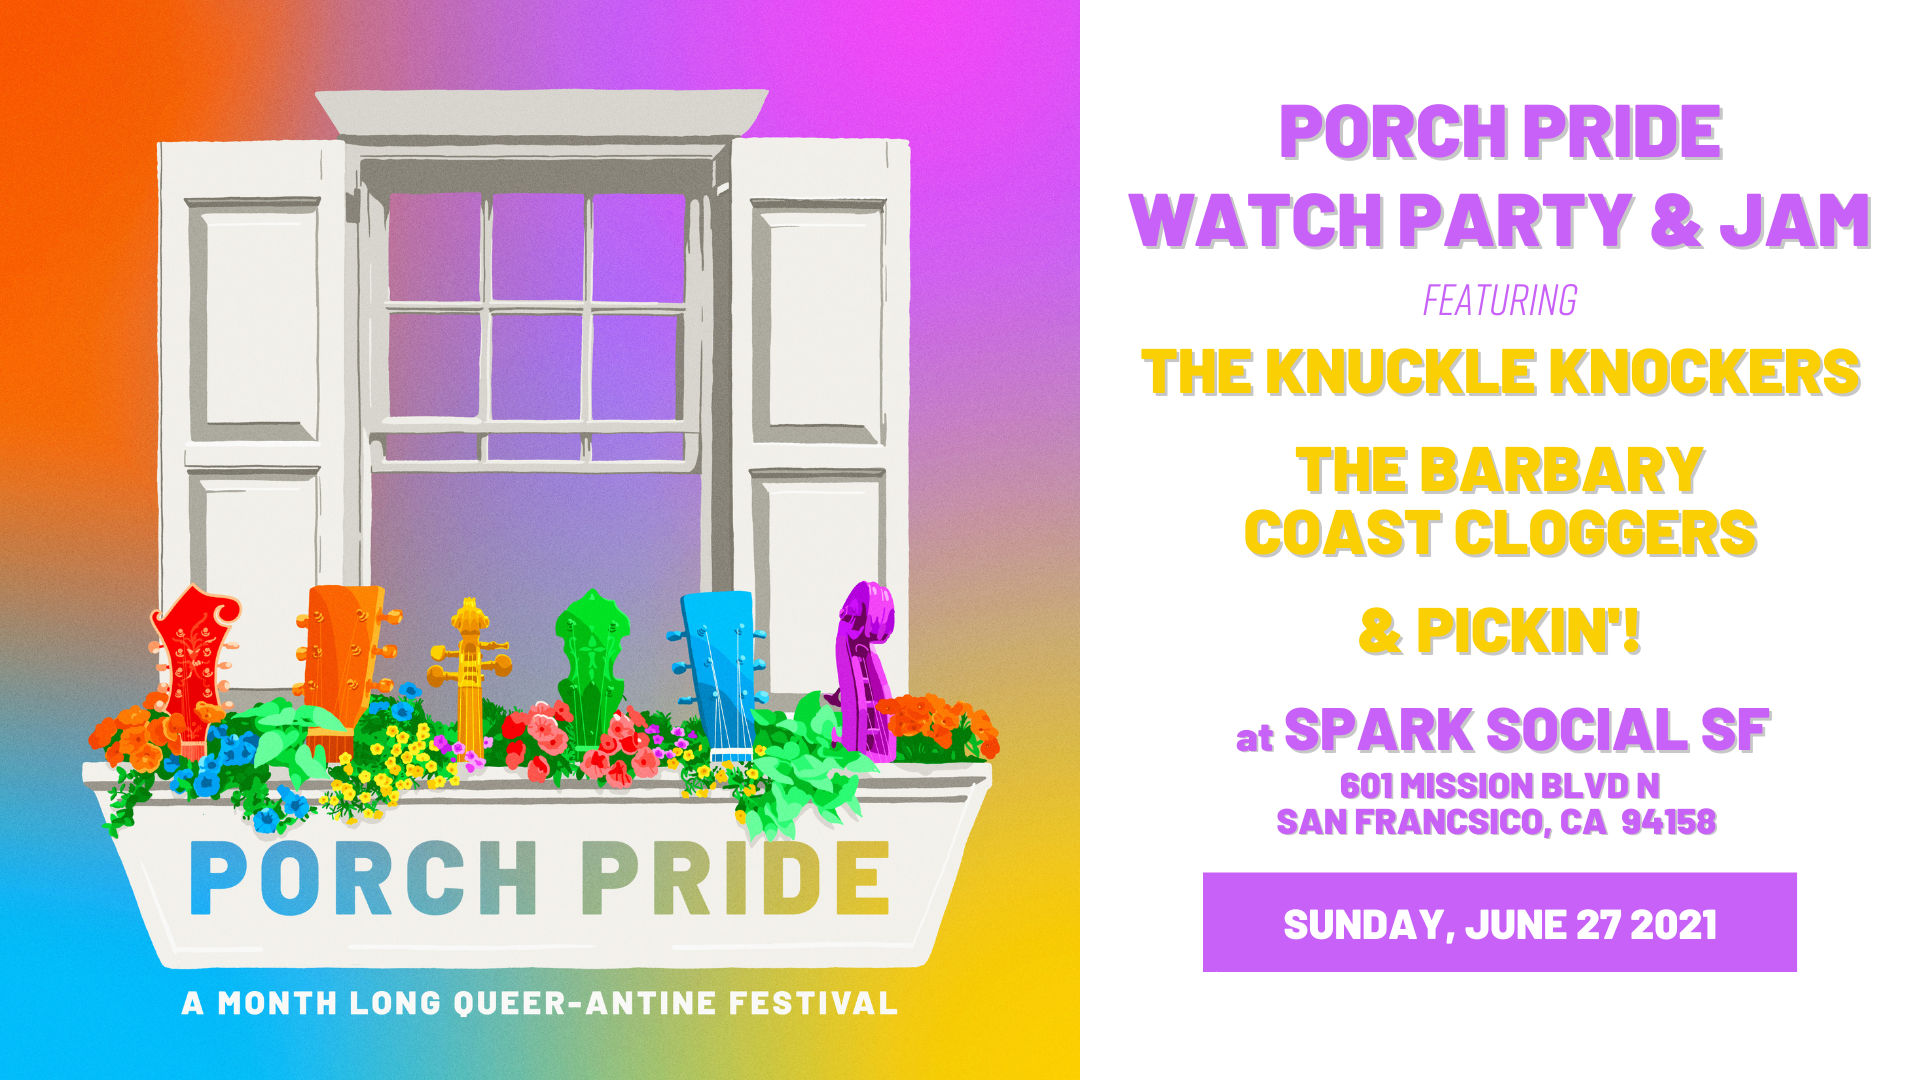 Porch Pride rainbow window box graphic on the right, with text on the right announcing the SF Porch Pride watch party & jam. All details are listed in plain-text below.